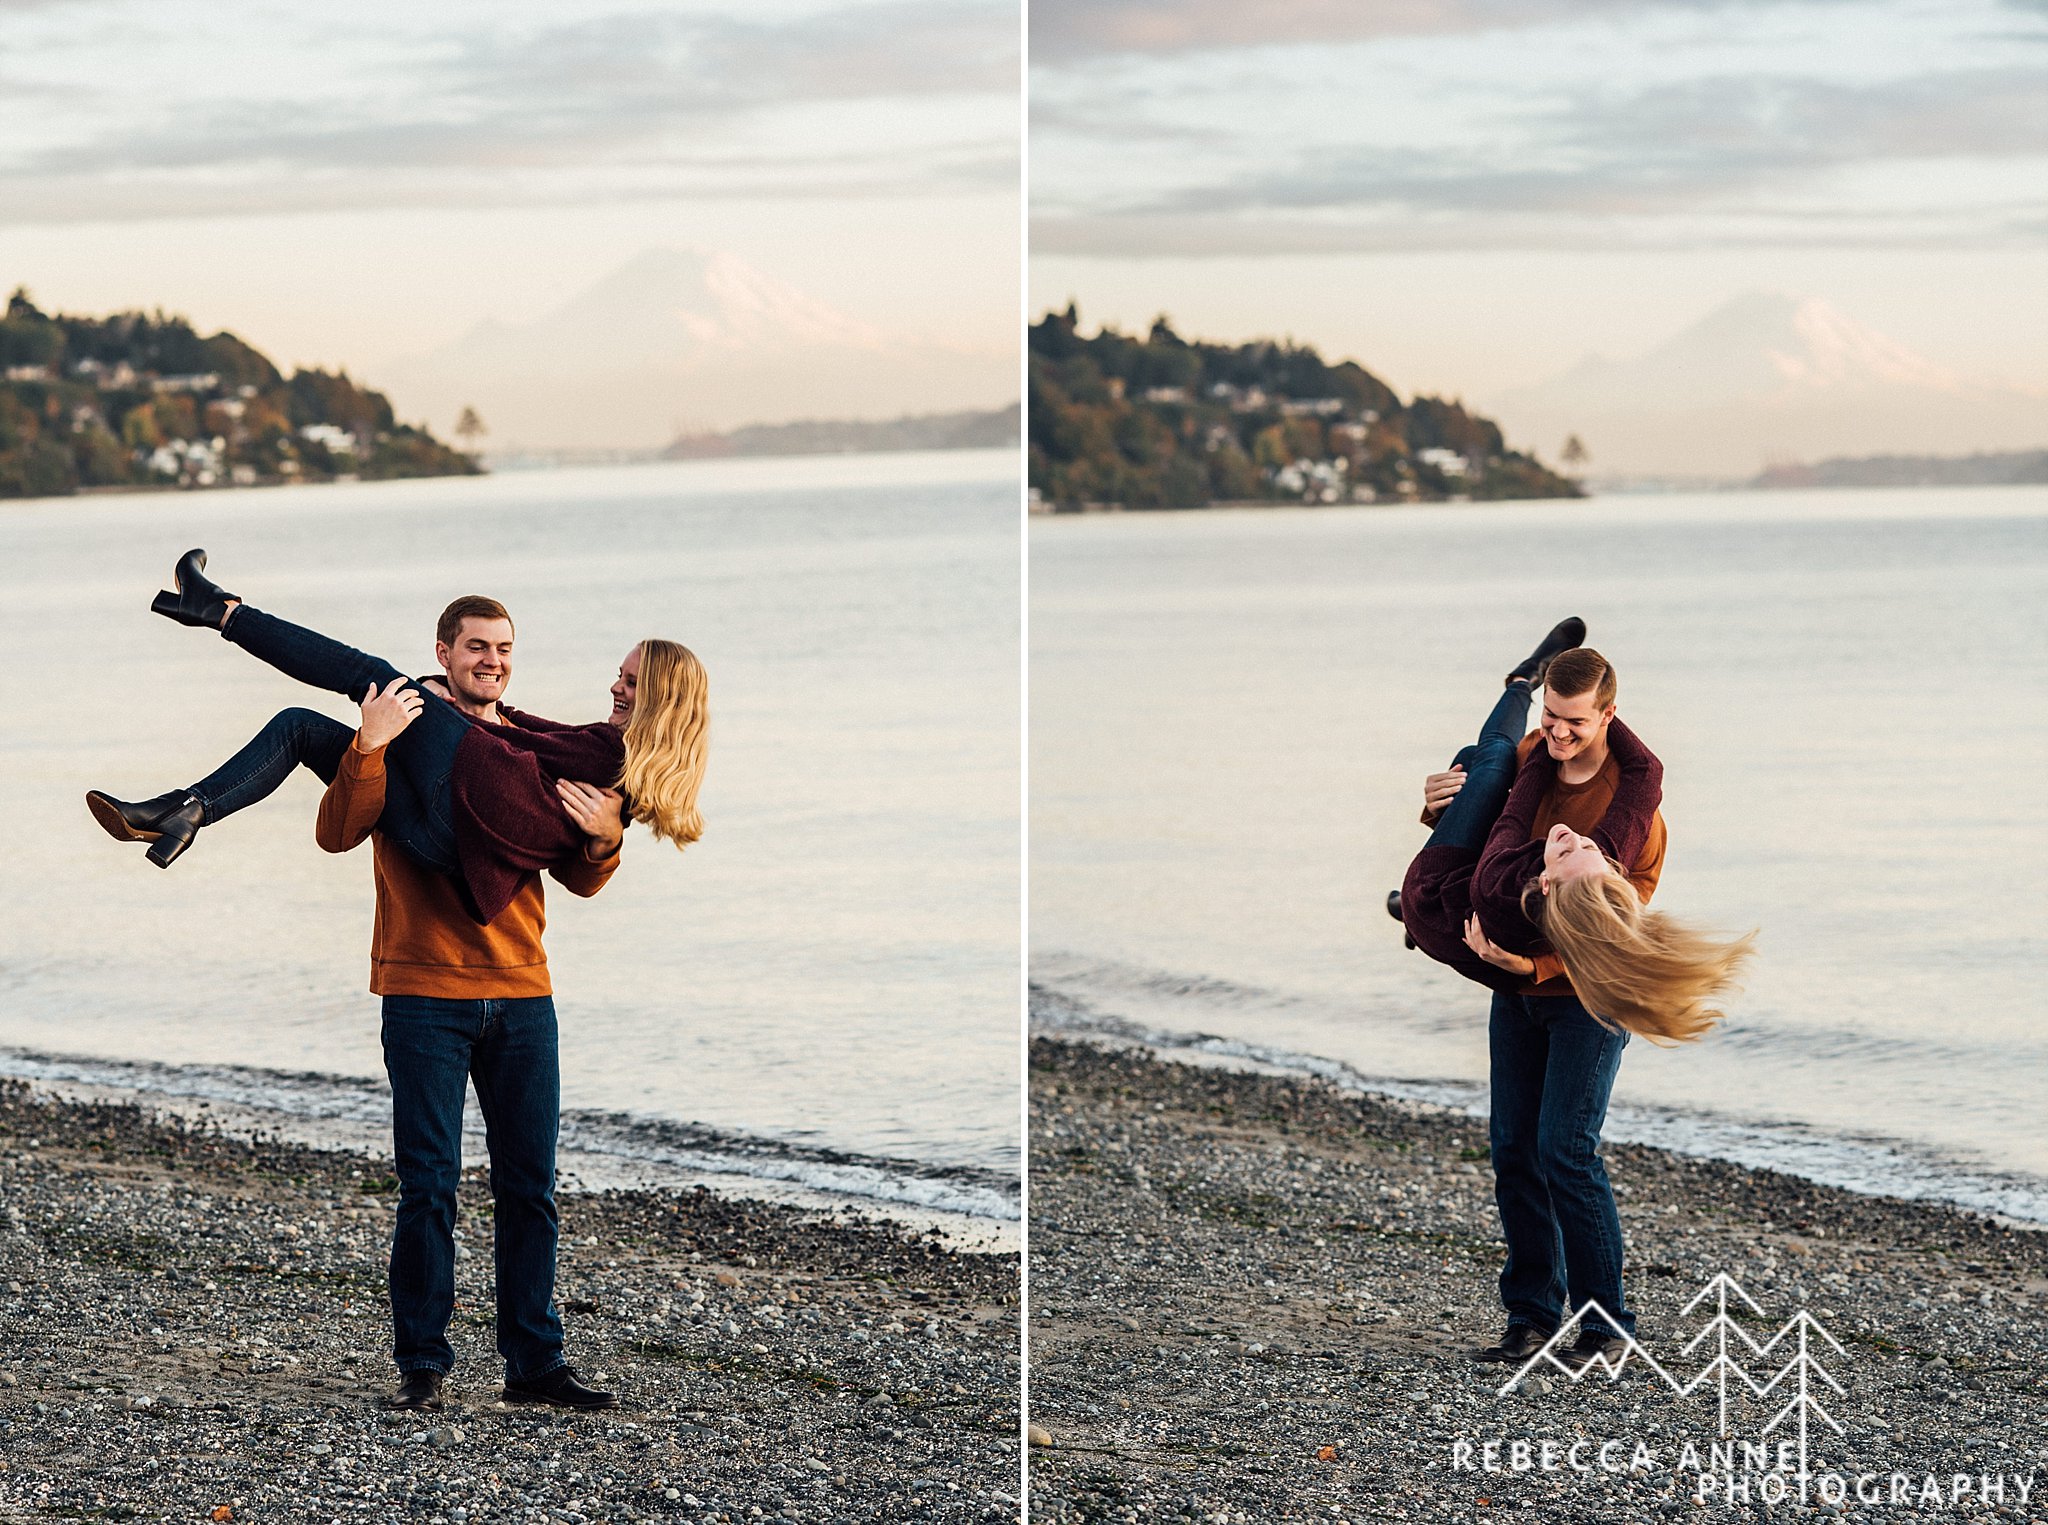 Discovery Park Engagement,Seattle engagement photographer,Seattle engagement Photography,washington engagement photographer,pacific northwest engagement photographer,tacoma engagement photographer,tacoma engagement photography,washington engagement photography,pacific northwest engagement photography,